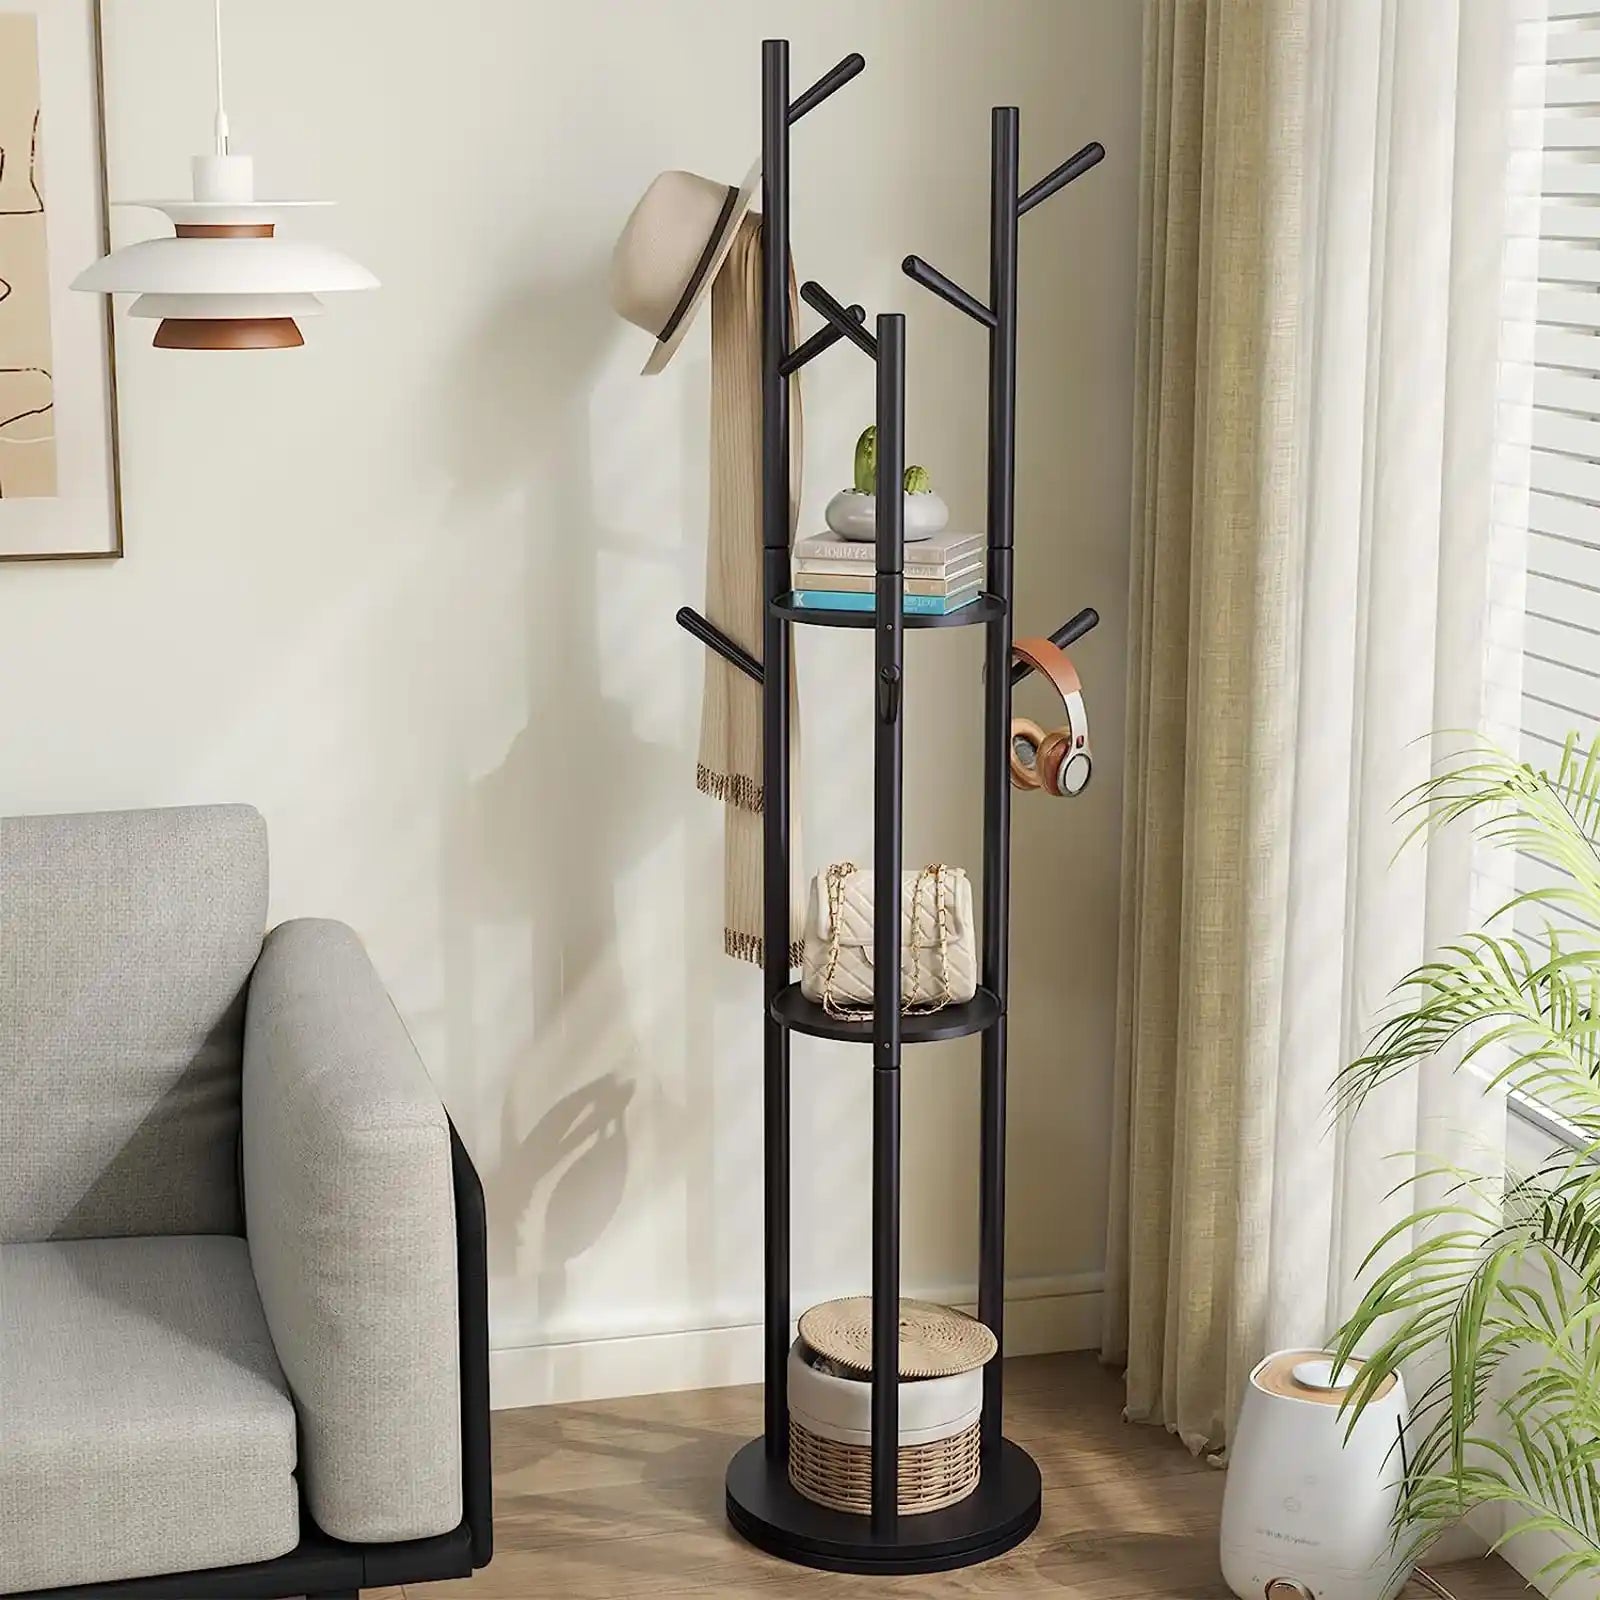 Rotary Coat Rack, Wooden Coat Rack Freestanding with 3 Shelves and 9 Hooks, Coat Tree, Sturdy and Easy Assembly Coat Rack Stand for Entryway,Hallway,Bedroom,Coats,Bags,Hats